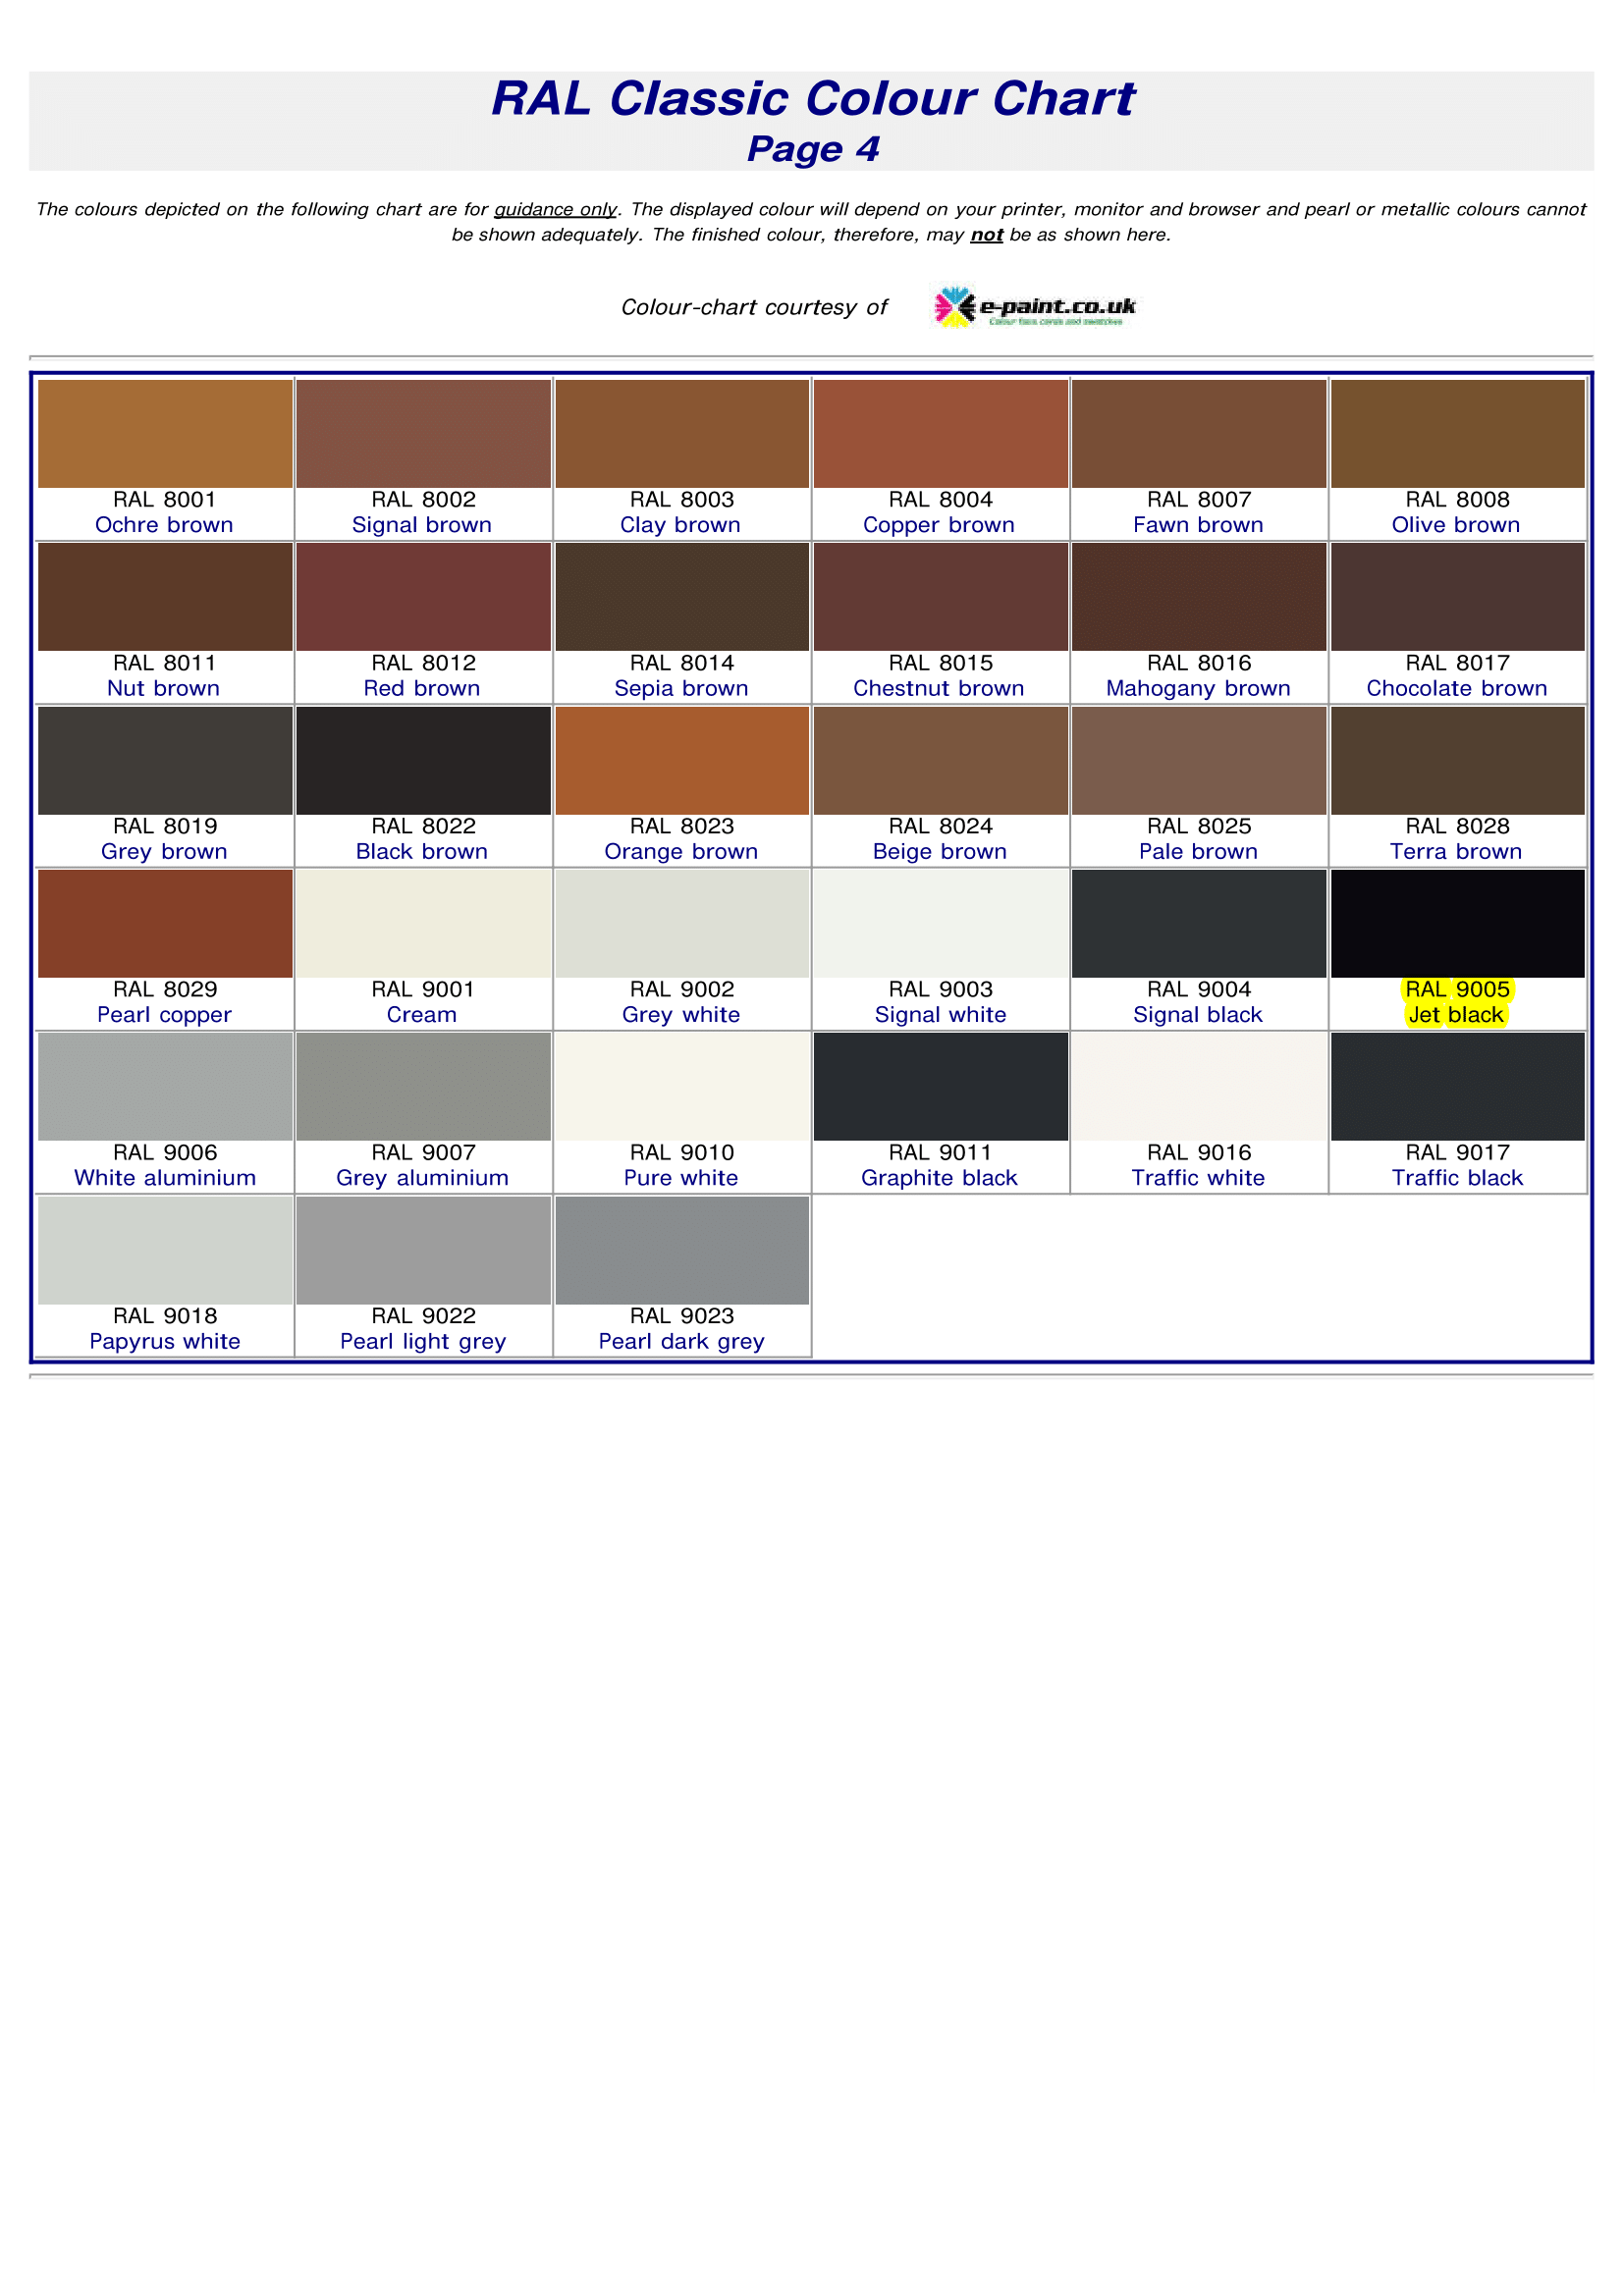 RAL classic colour code chart